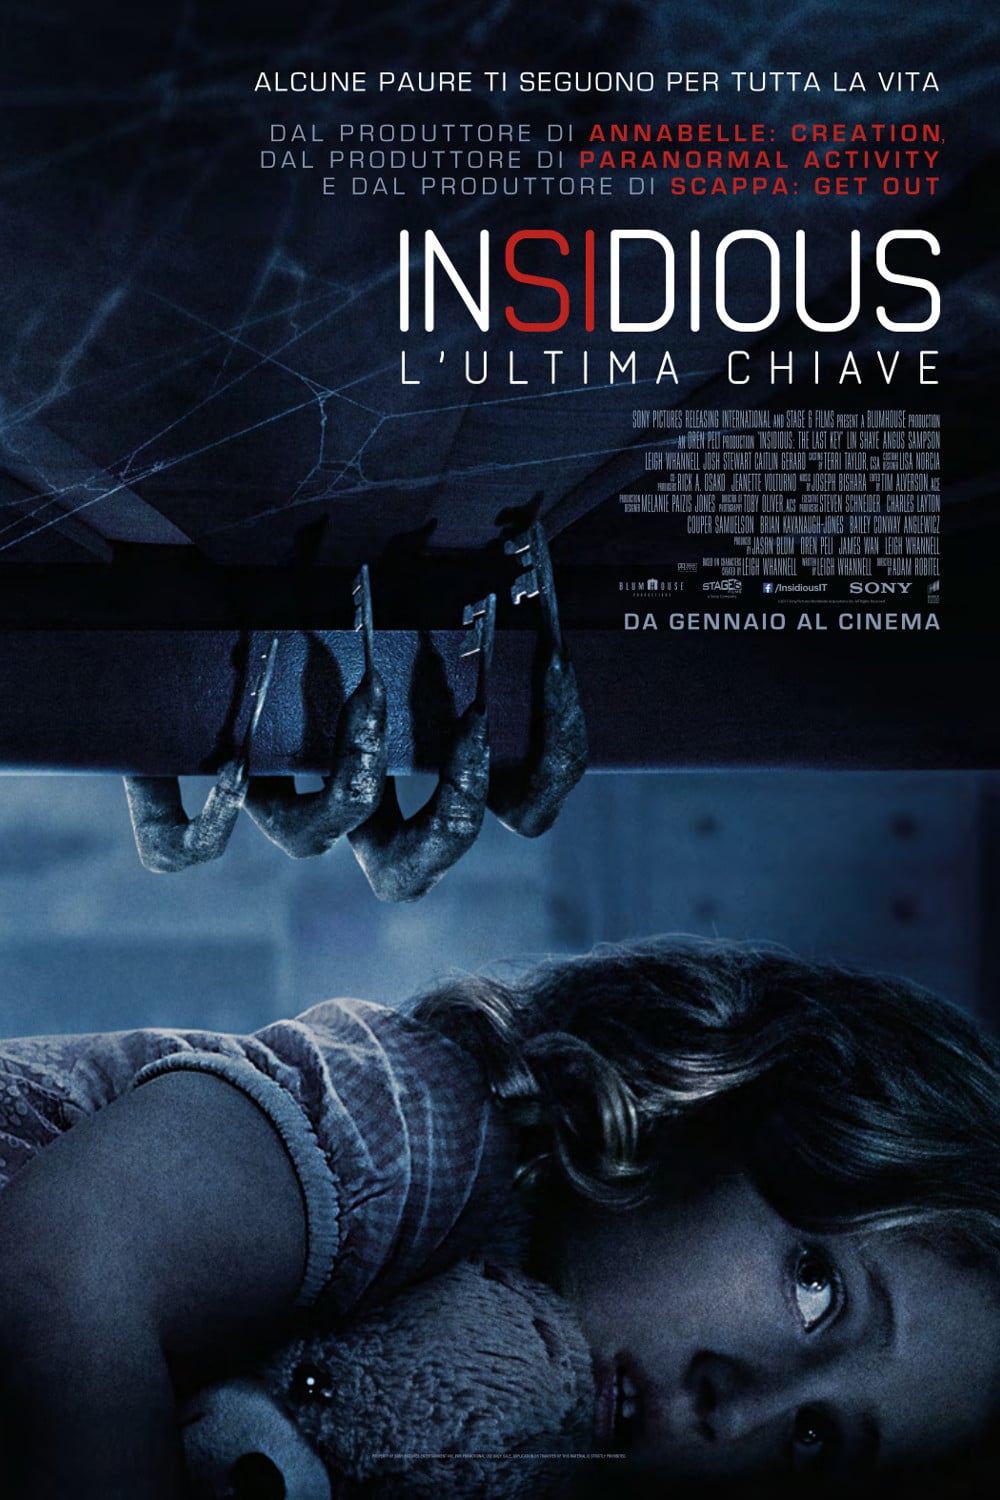 Poster for the movie "Insidious: l'ultima chiave"